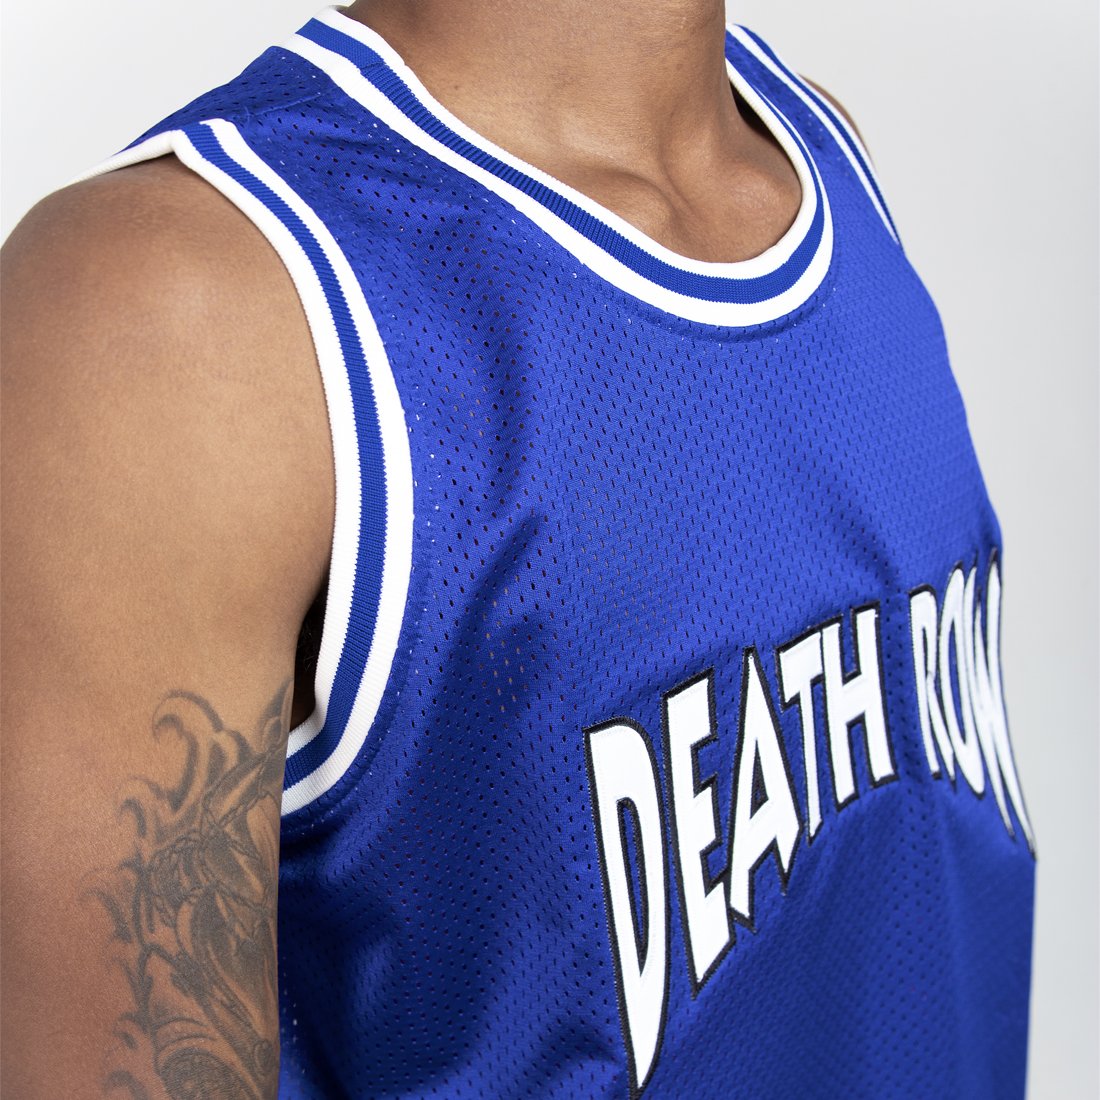 Crew-Neck Basketball Jersey | Death Row Apparel | King Ice Yellow / S